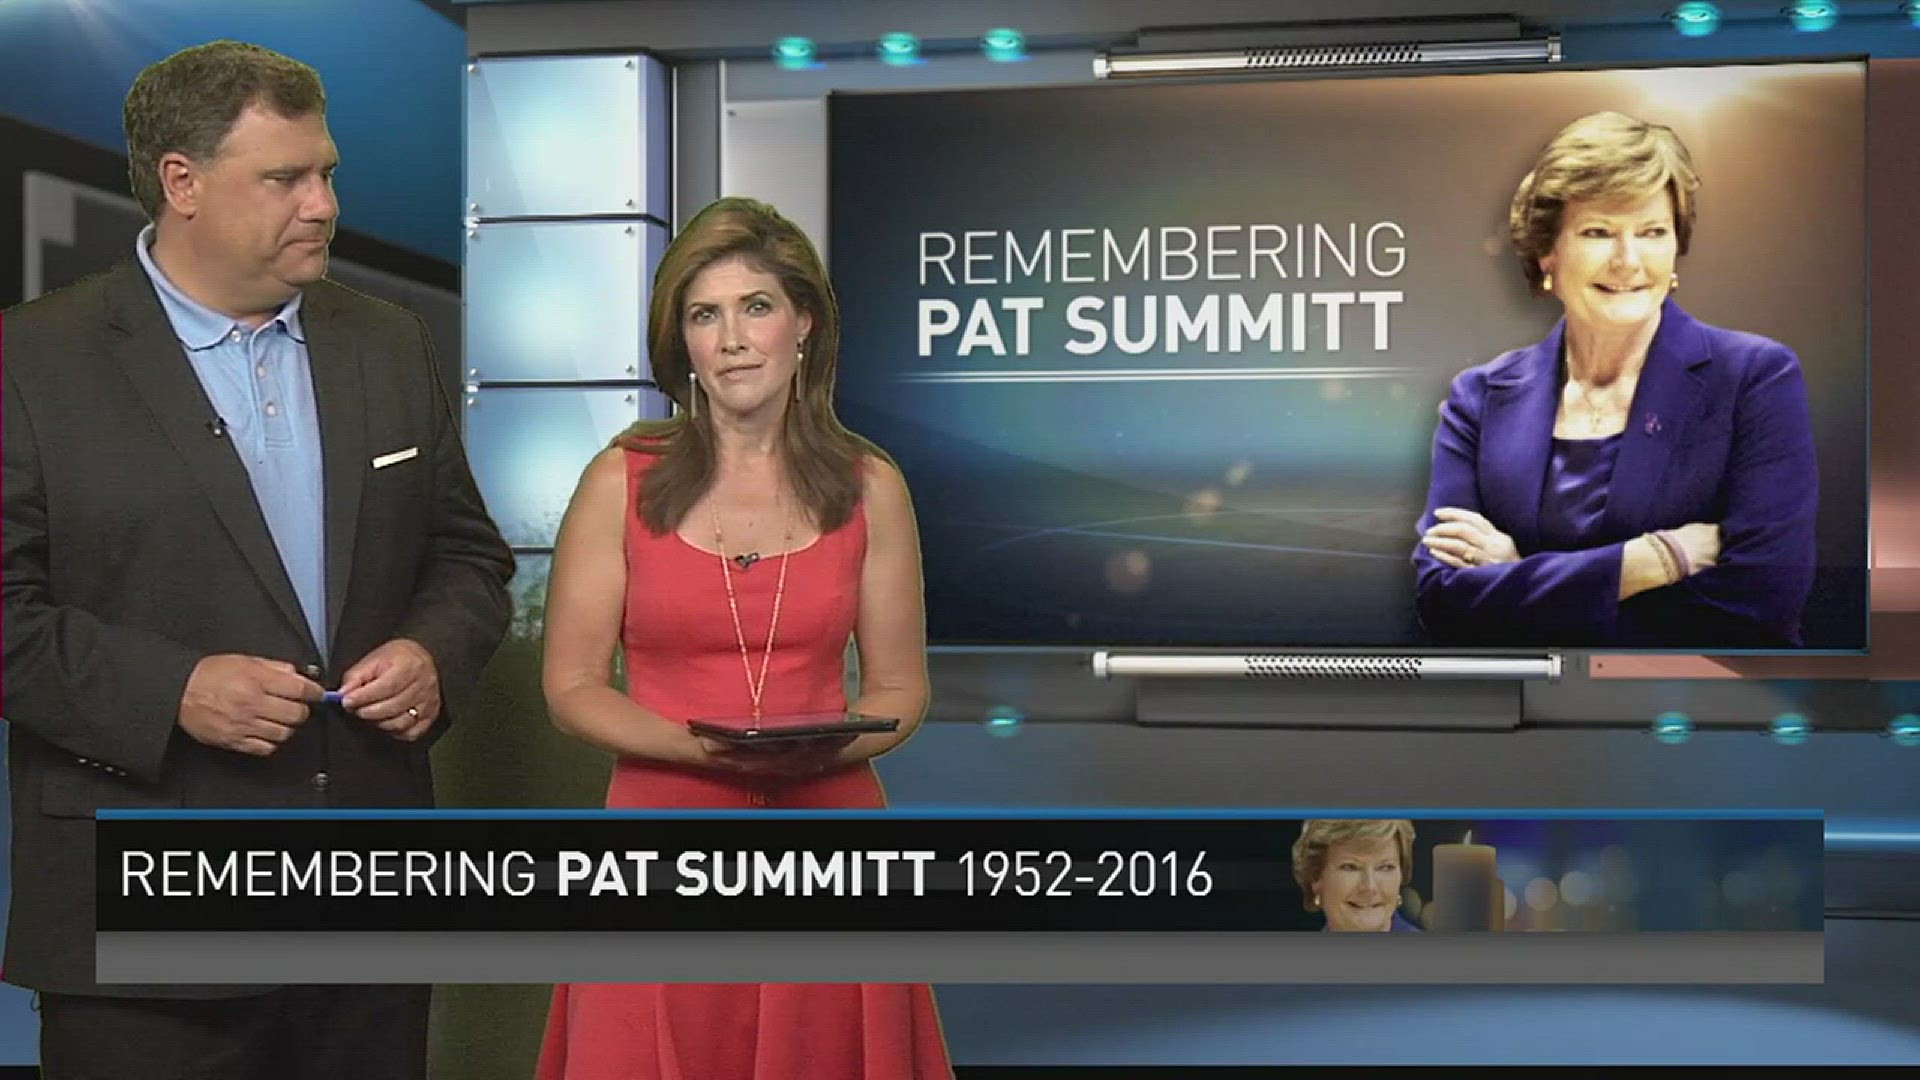 June 28, 2017: Hearts at the Women's Basketball Hall of Fame are heavy on the anniversary of Pat Summitt's death, but they held no special ceremonies to mark the occasion.  They say that's how Pat would have wanted it.